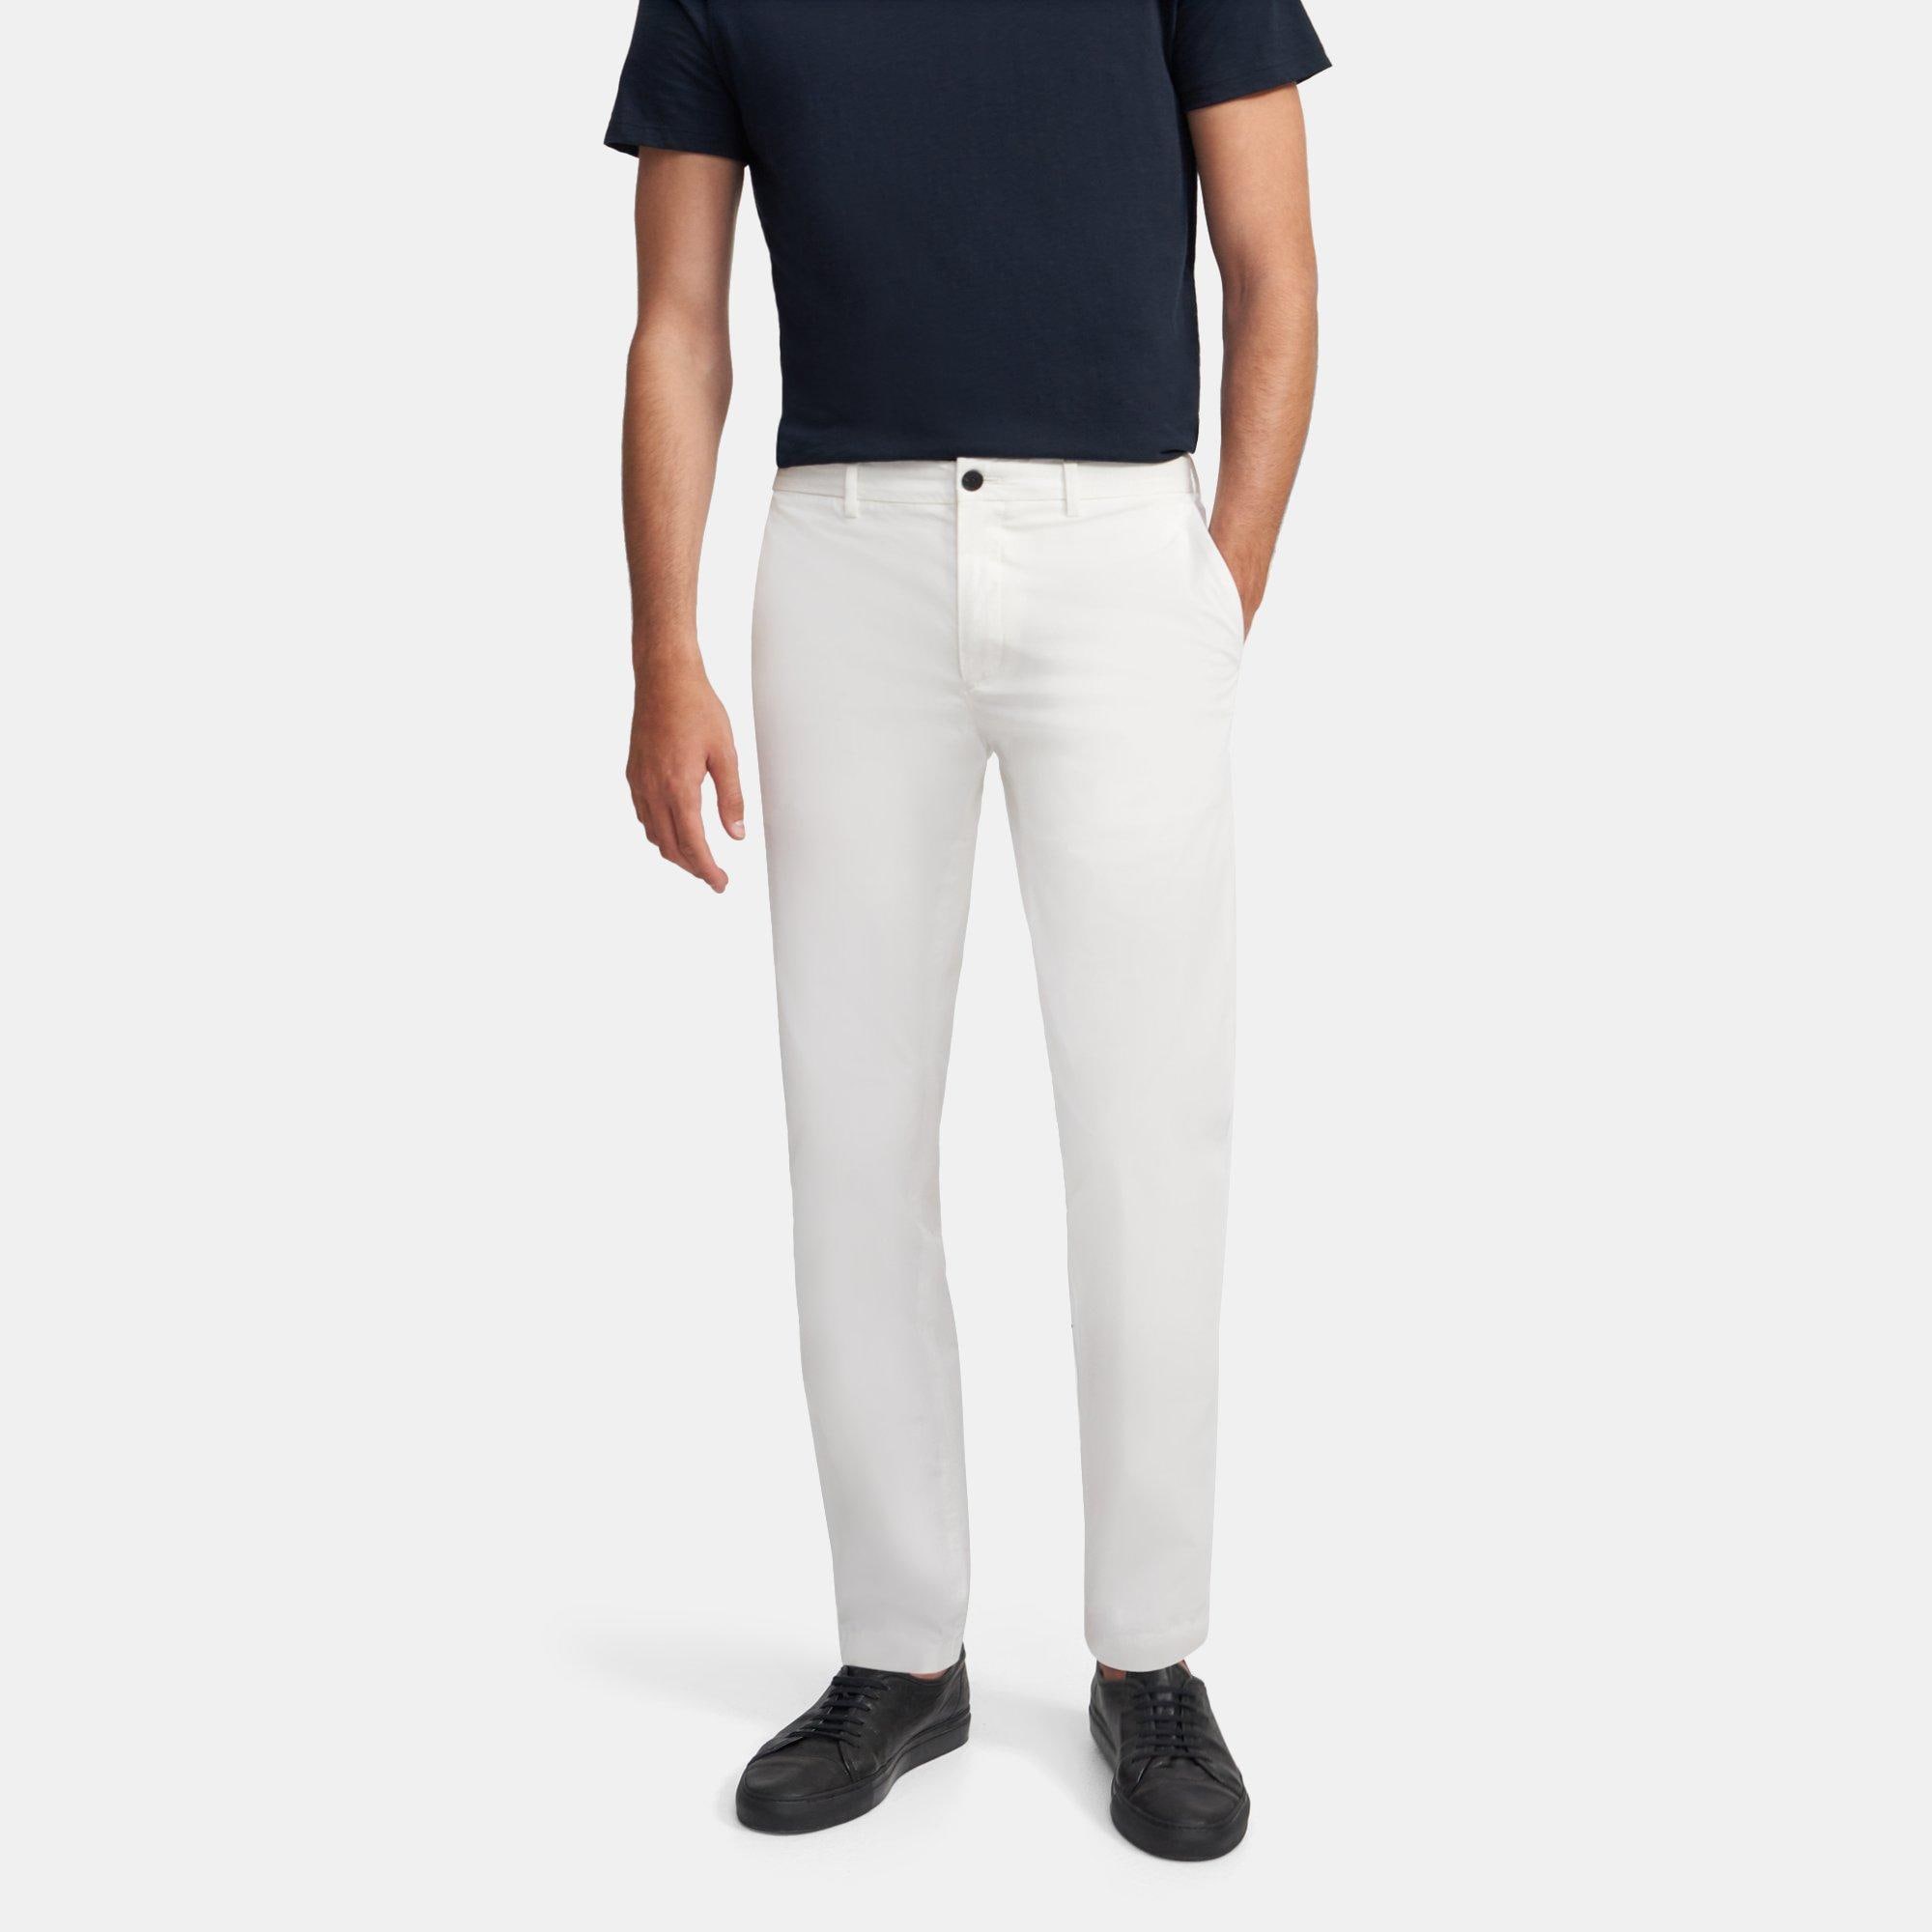 Theory Classic-Fit Pant in Garment Dyed Cotton